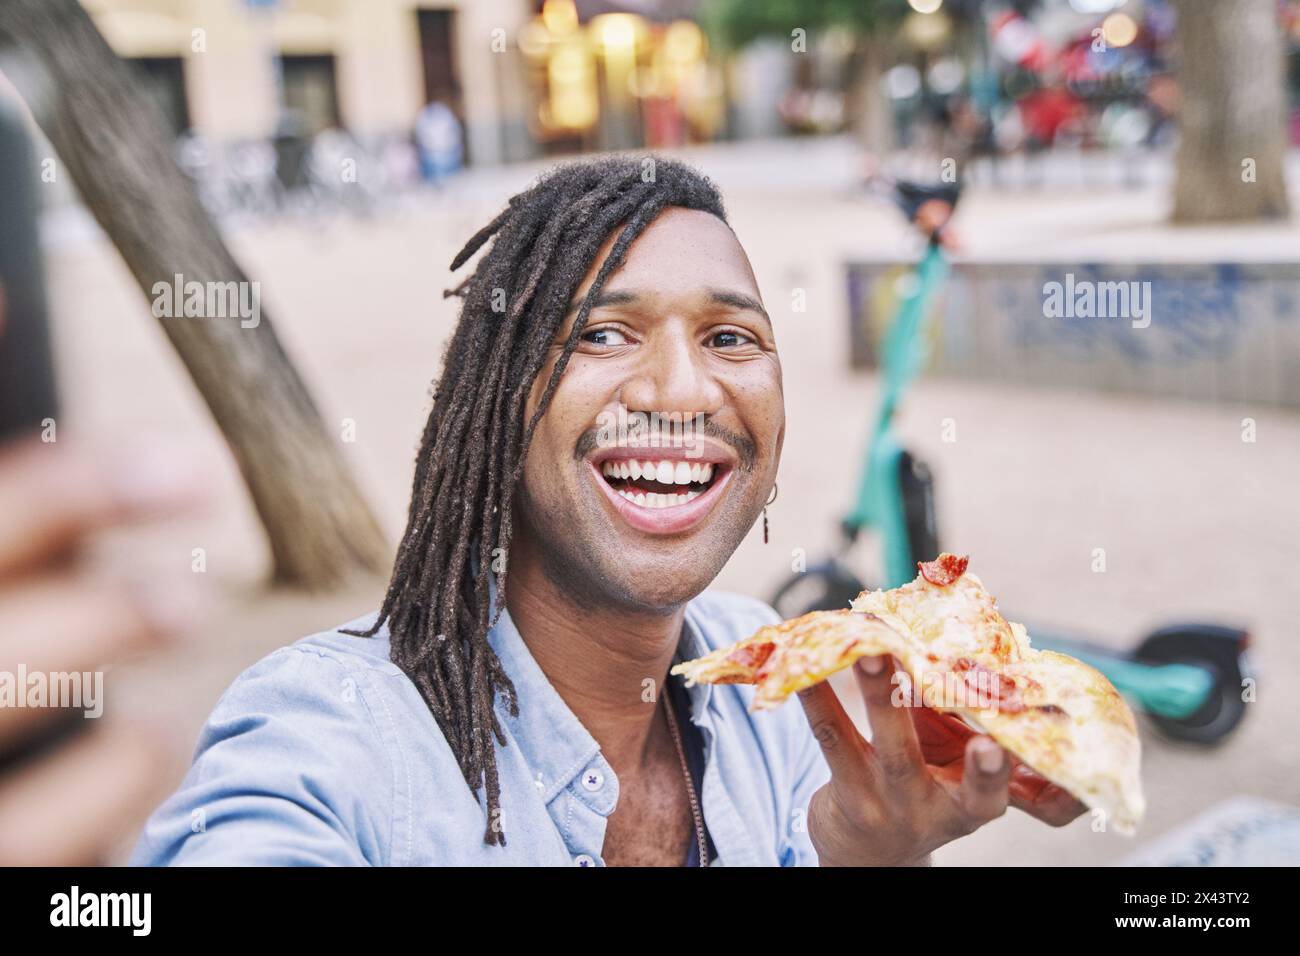 attractive man with braids holding a slice of pizza in his hand while taking a photo with his smart phone on the street Stock Photo